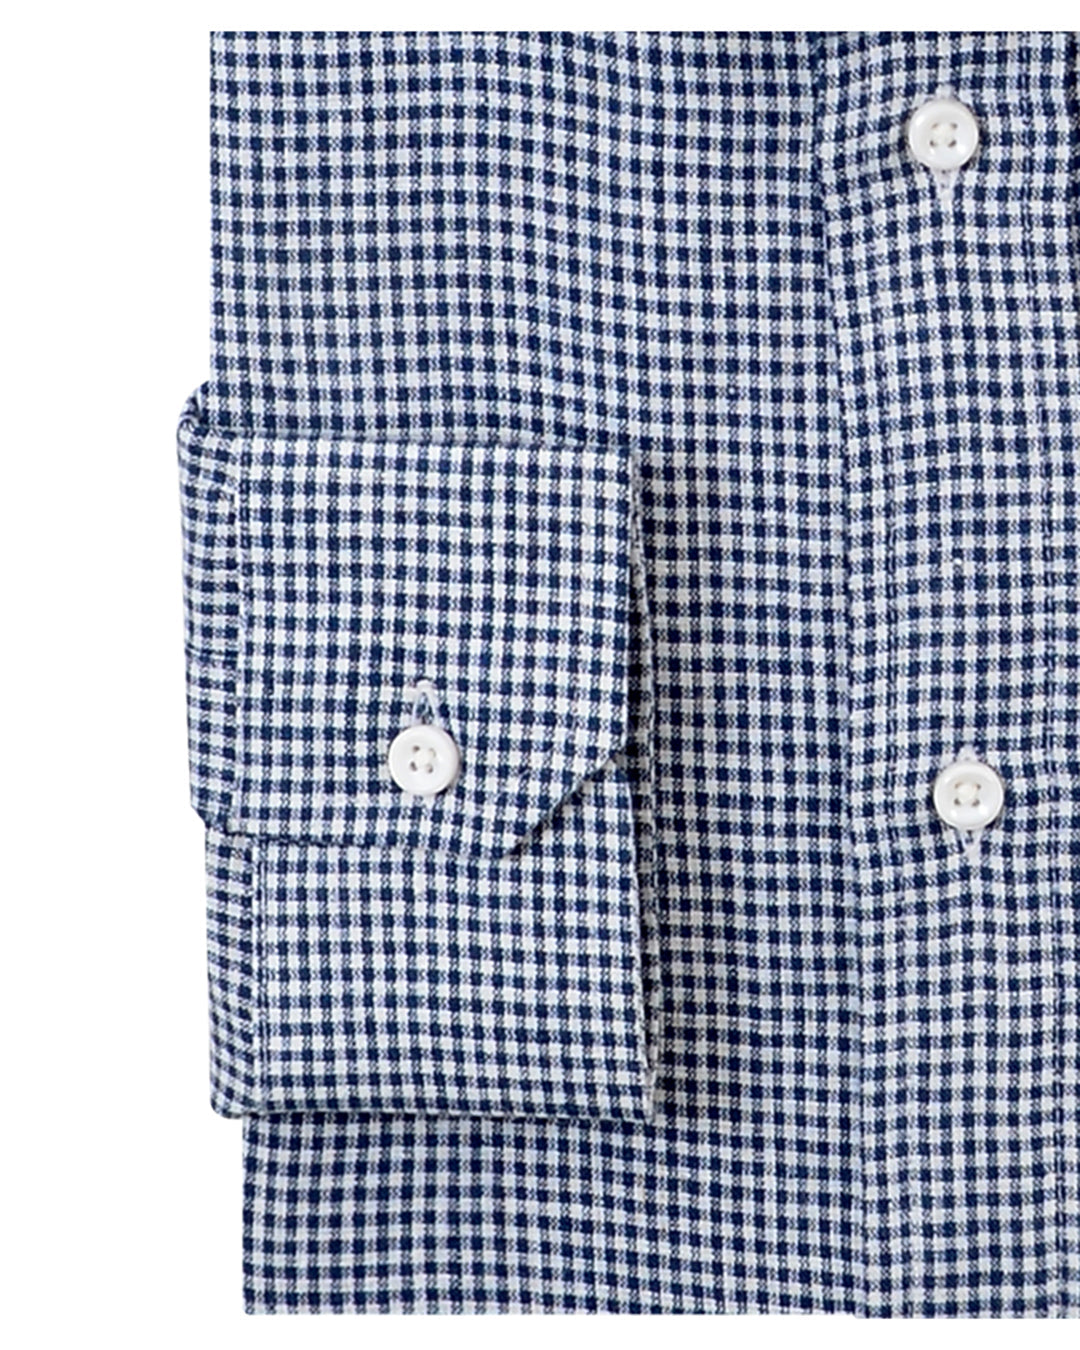 Cuff of the custom linen shirt for men in blue and white gingham by Luxire Clothing